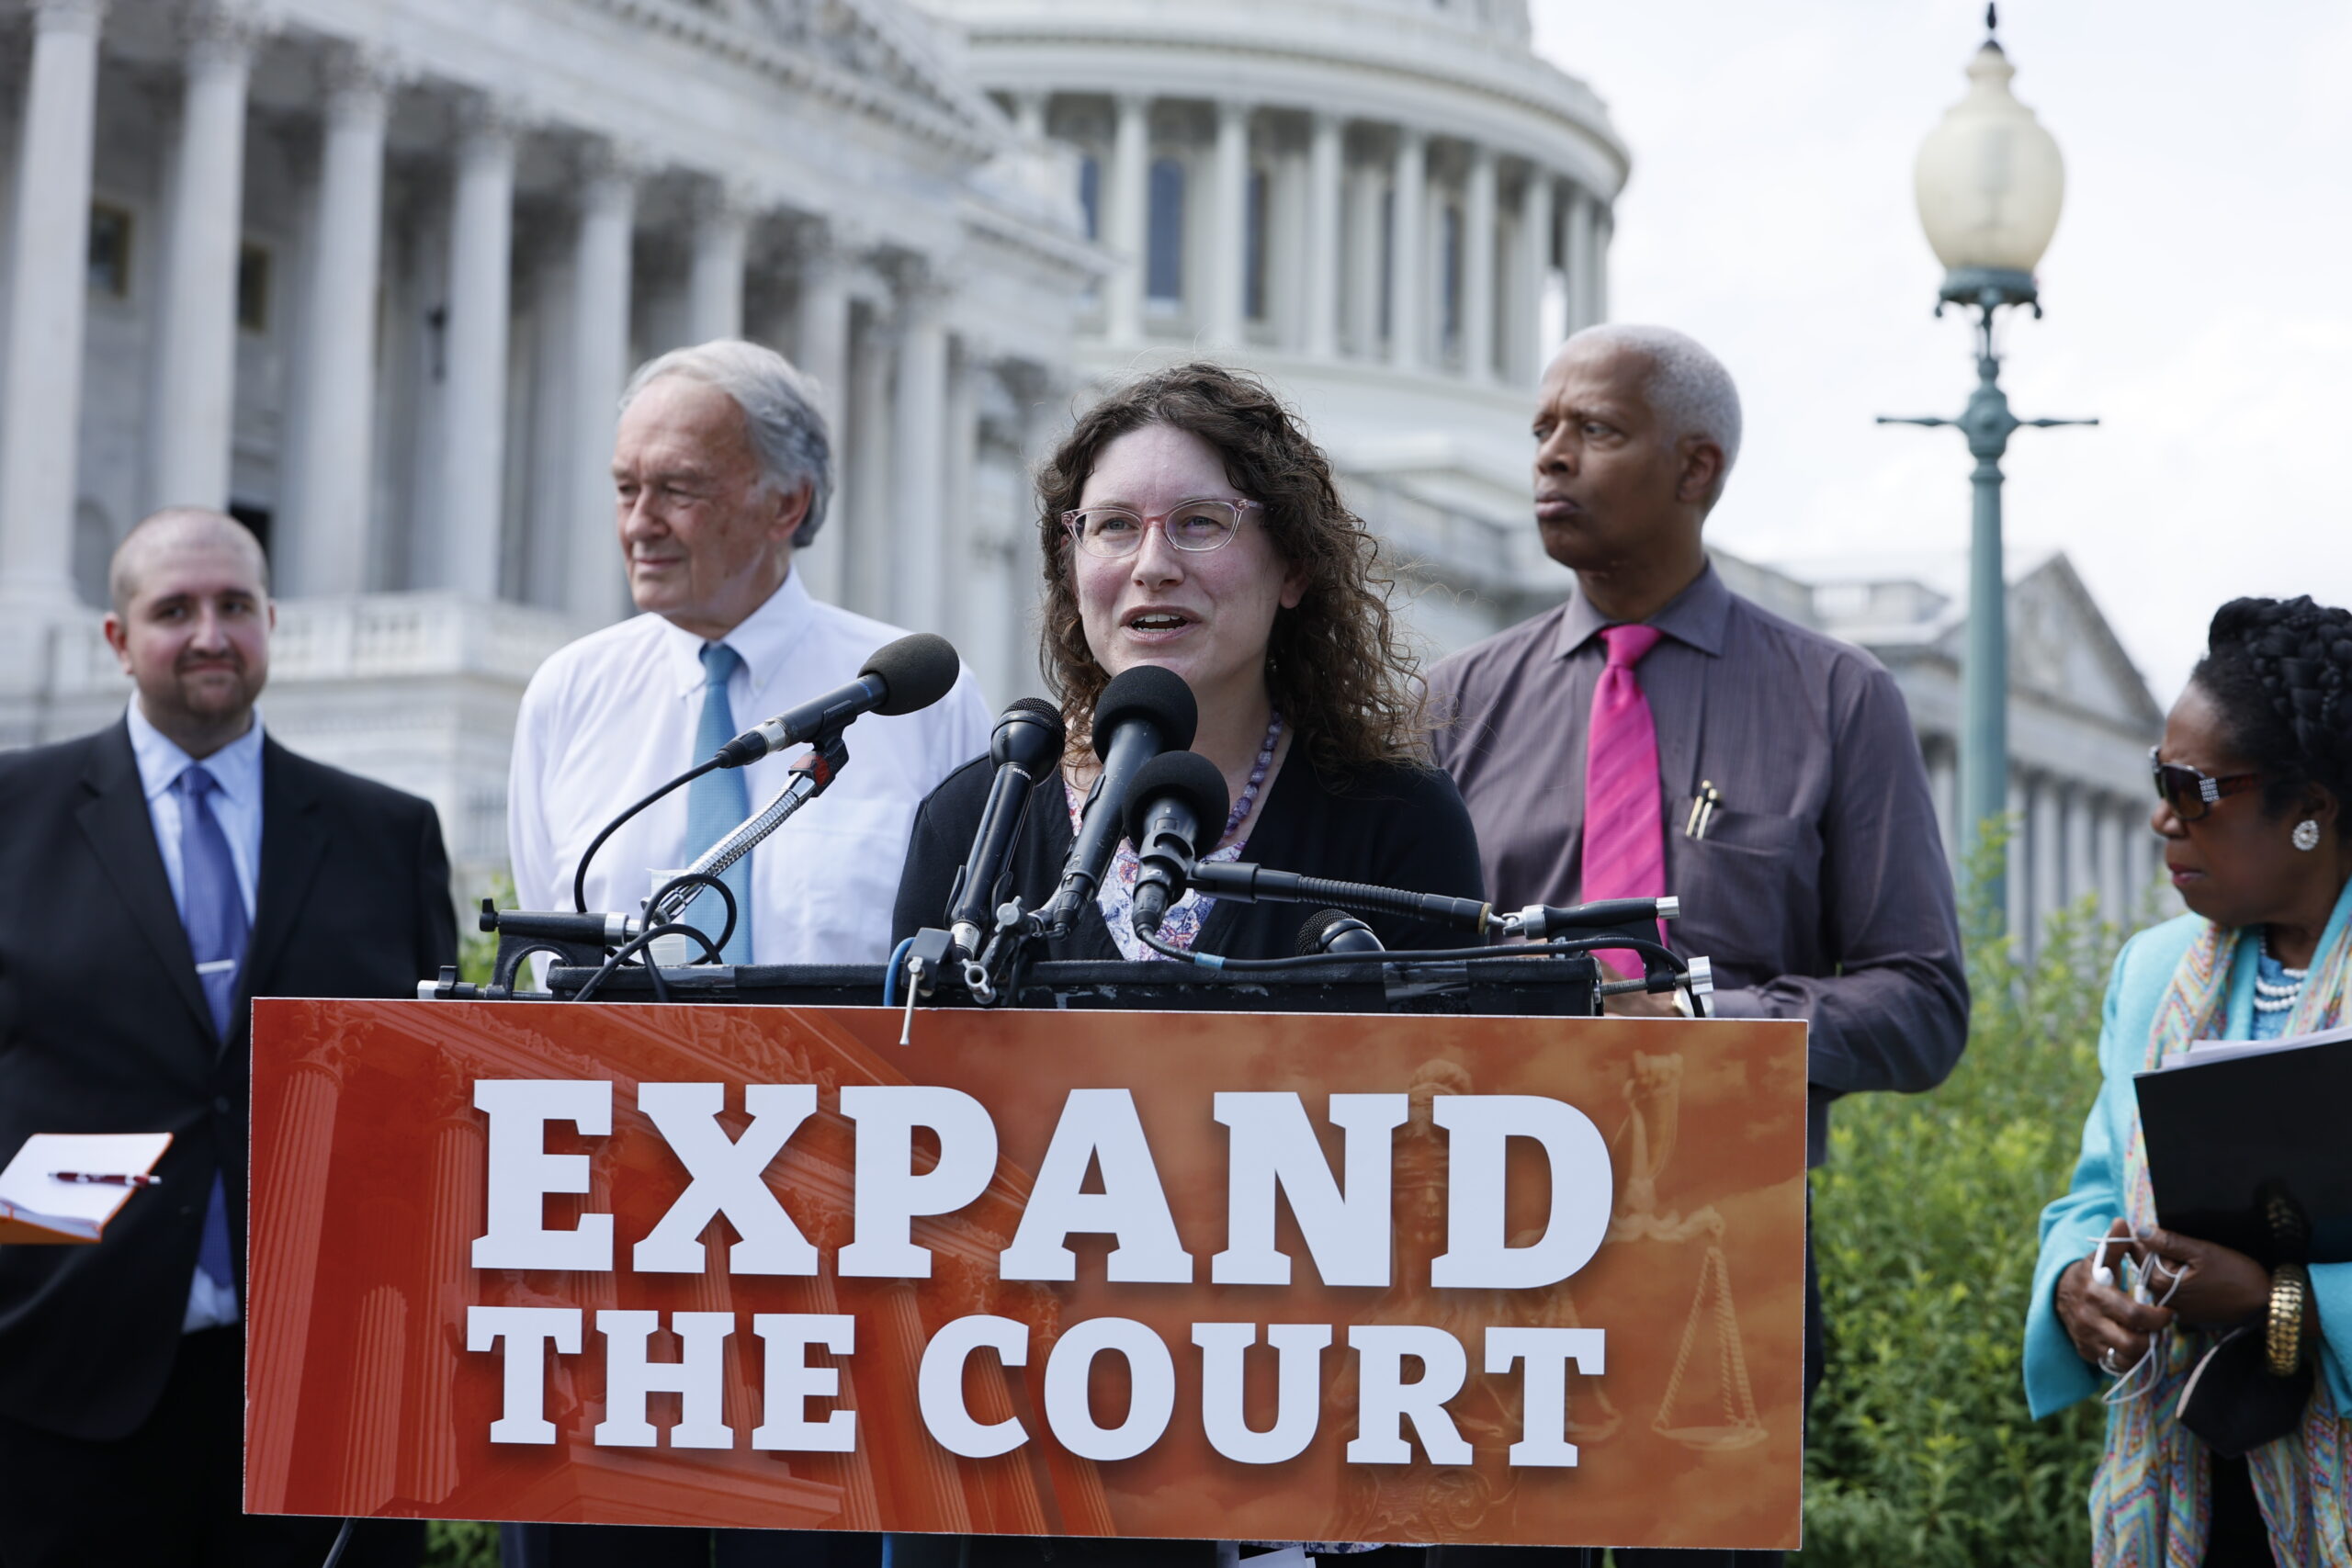 Expand The Court: Save Our Democracy" Press Conference Live From The U.S. Capitol